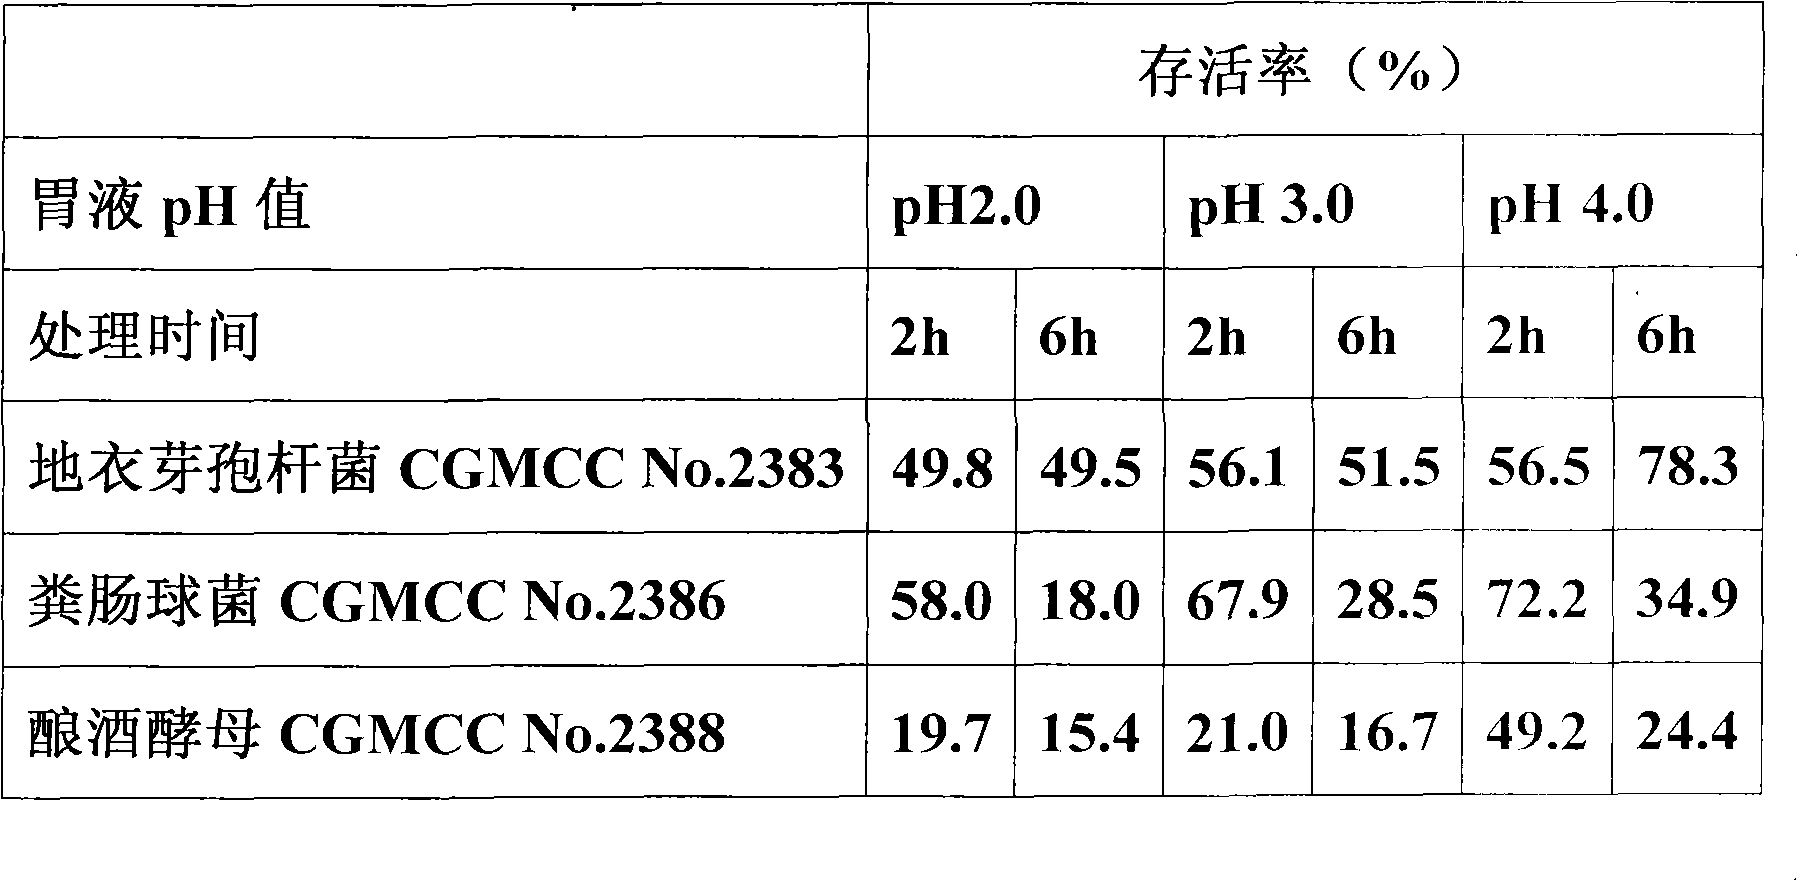 Micro-ecological preparation and application thereof